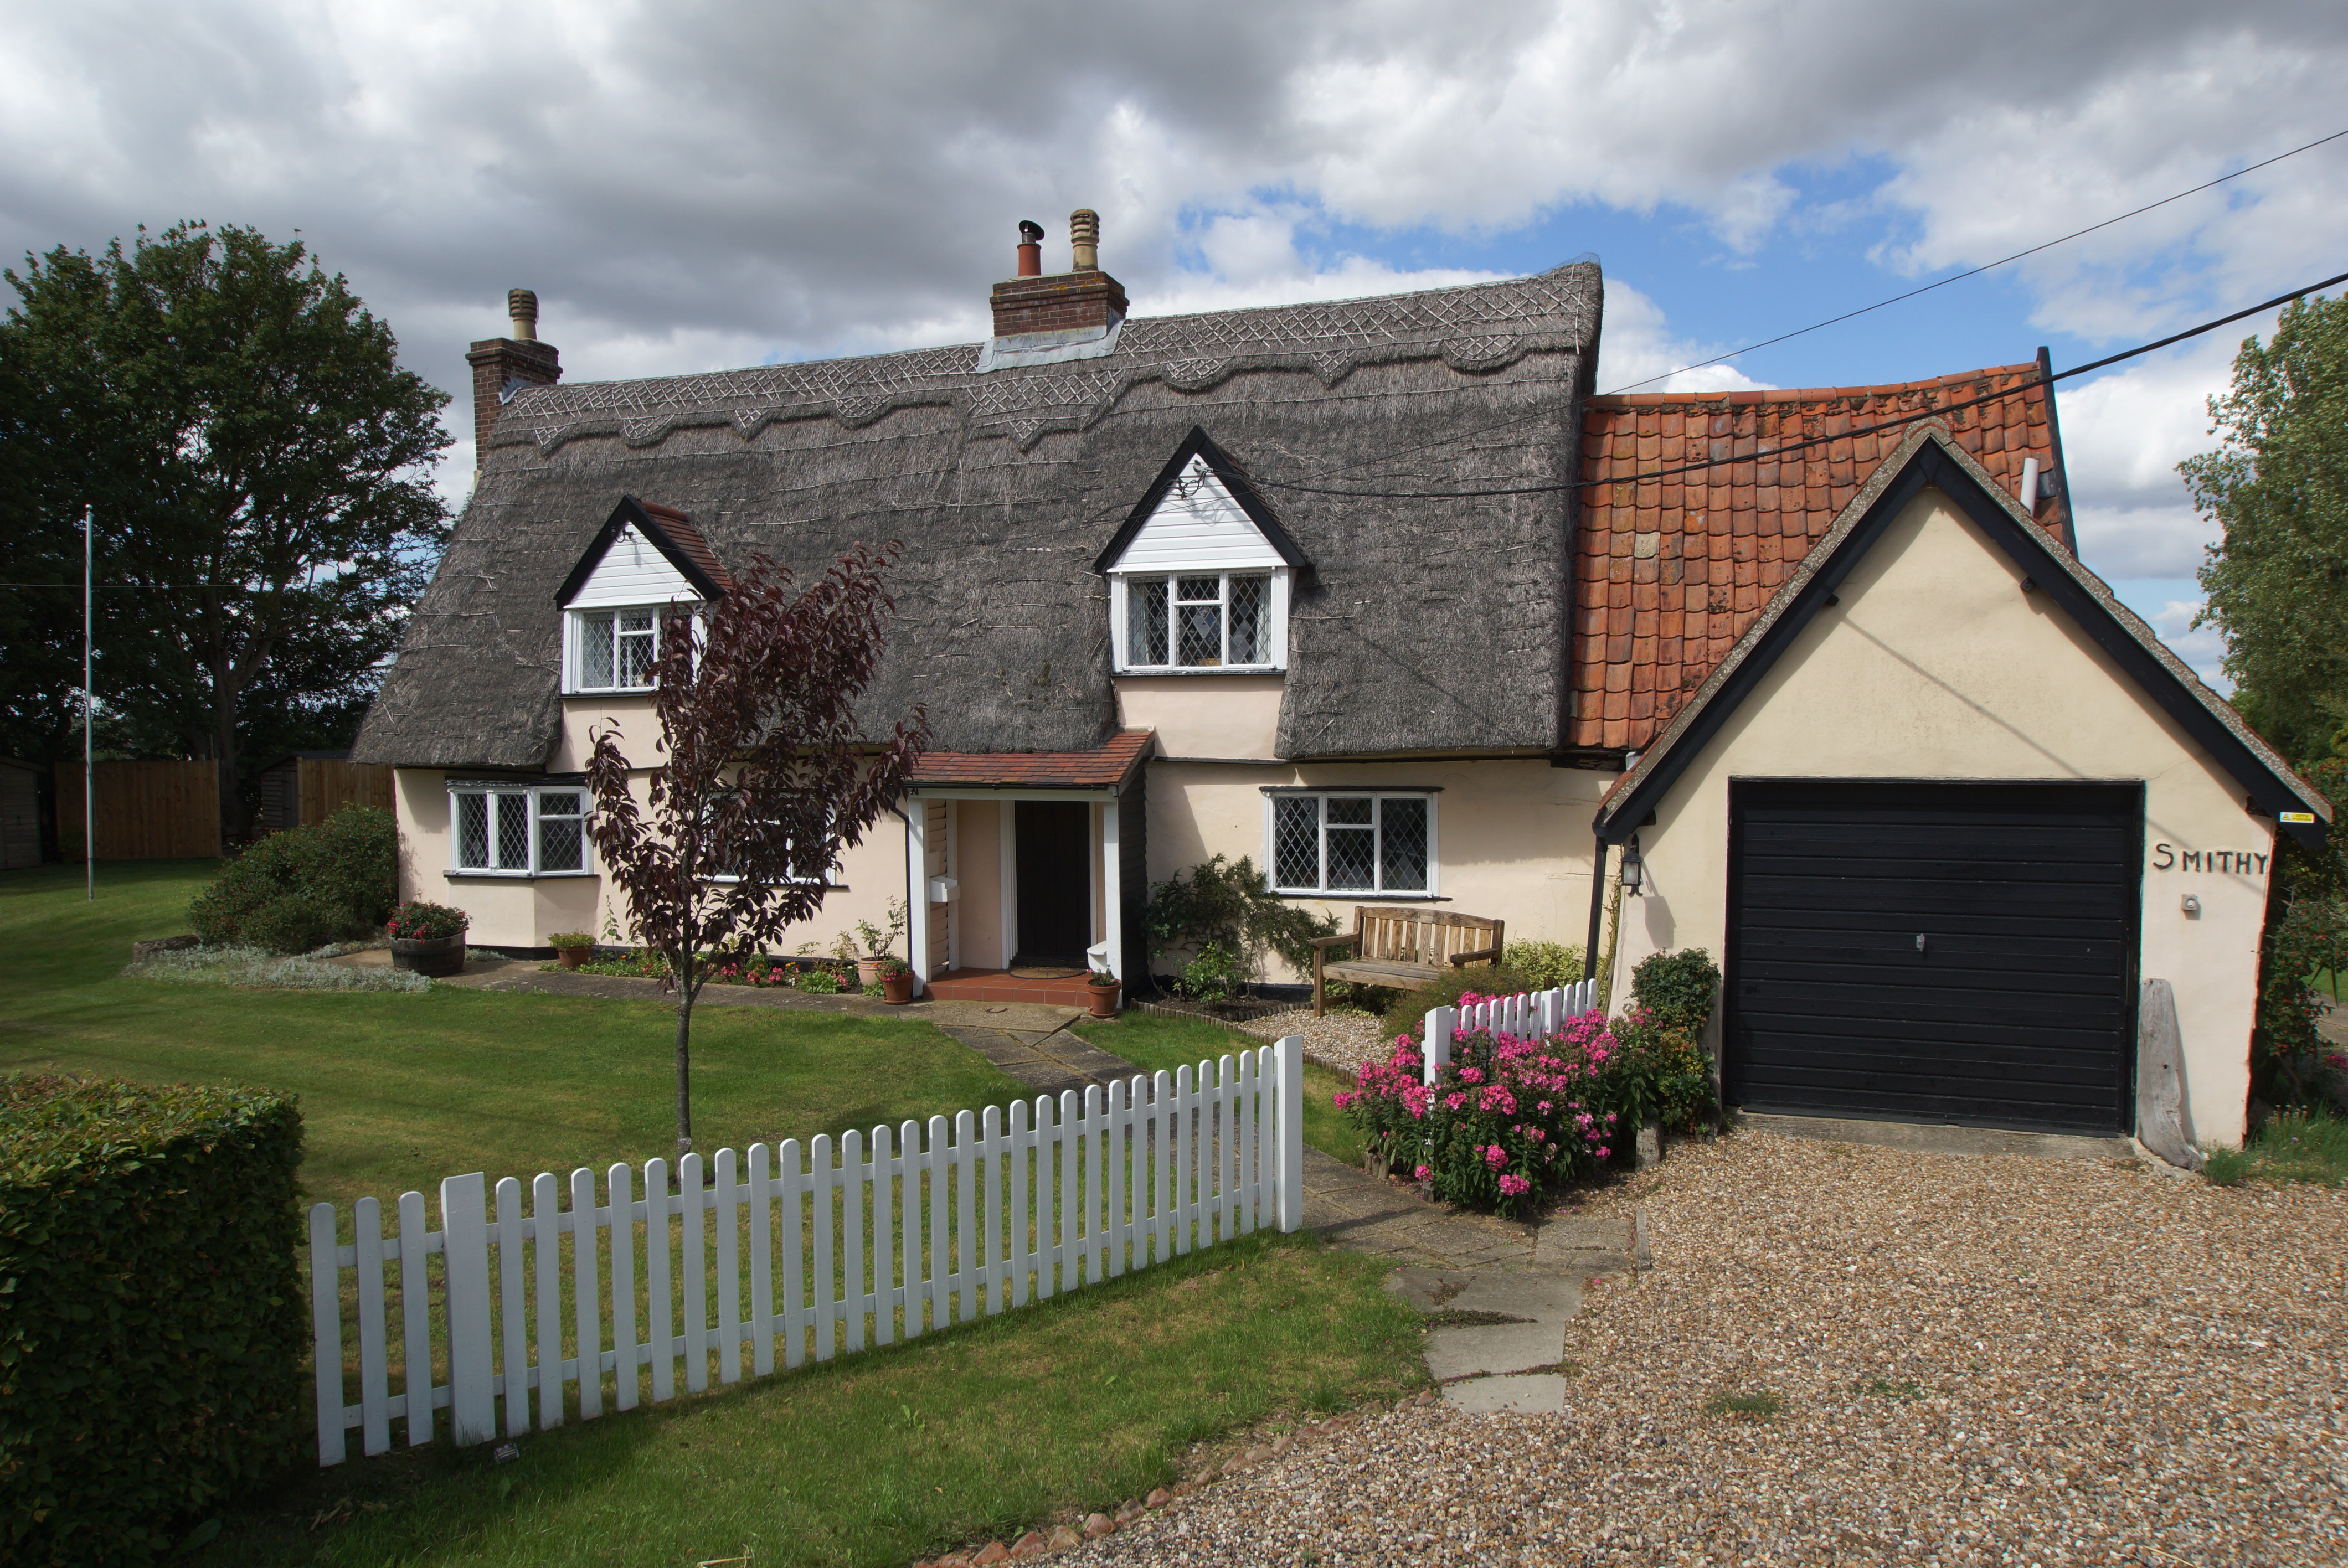 Grade II Lised thatched cottage with white picket fence and flowers